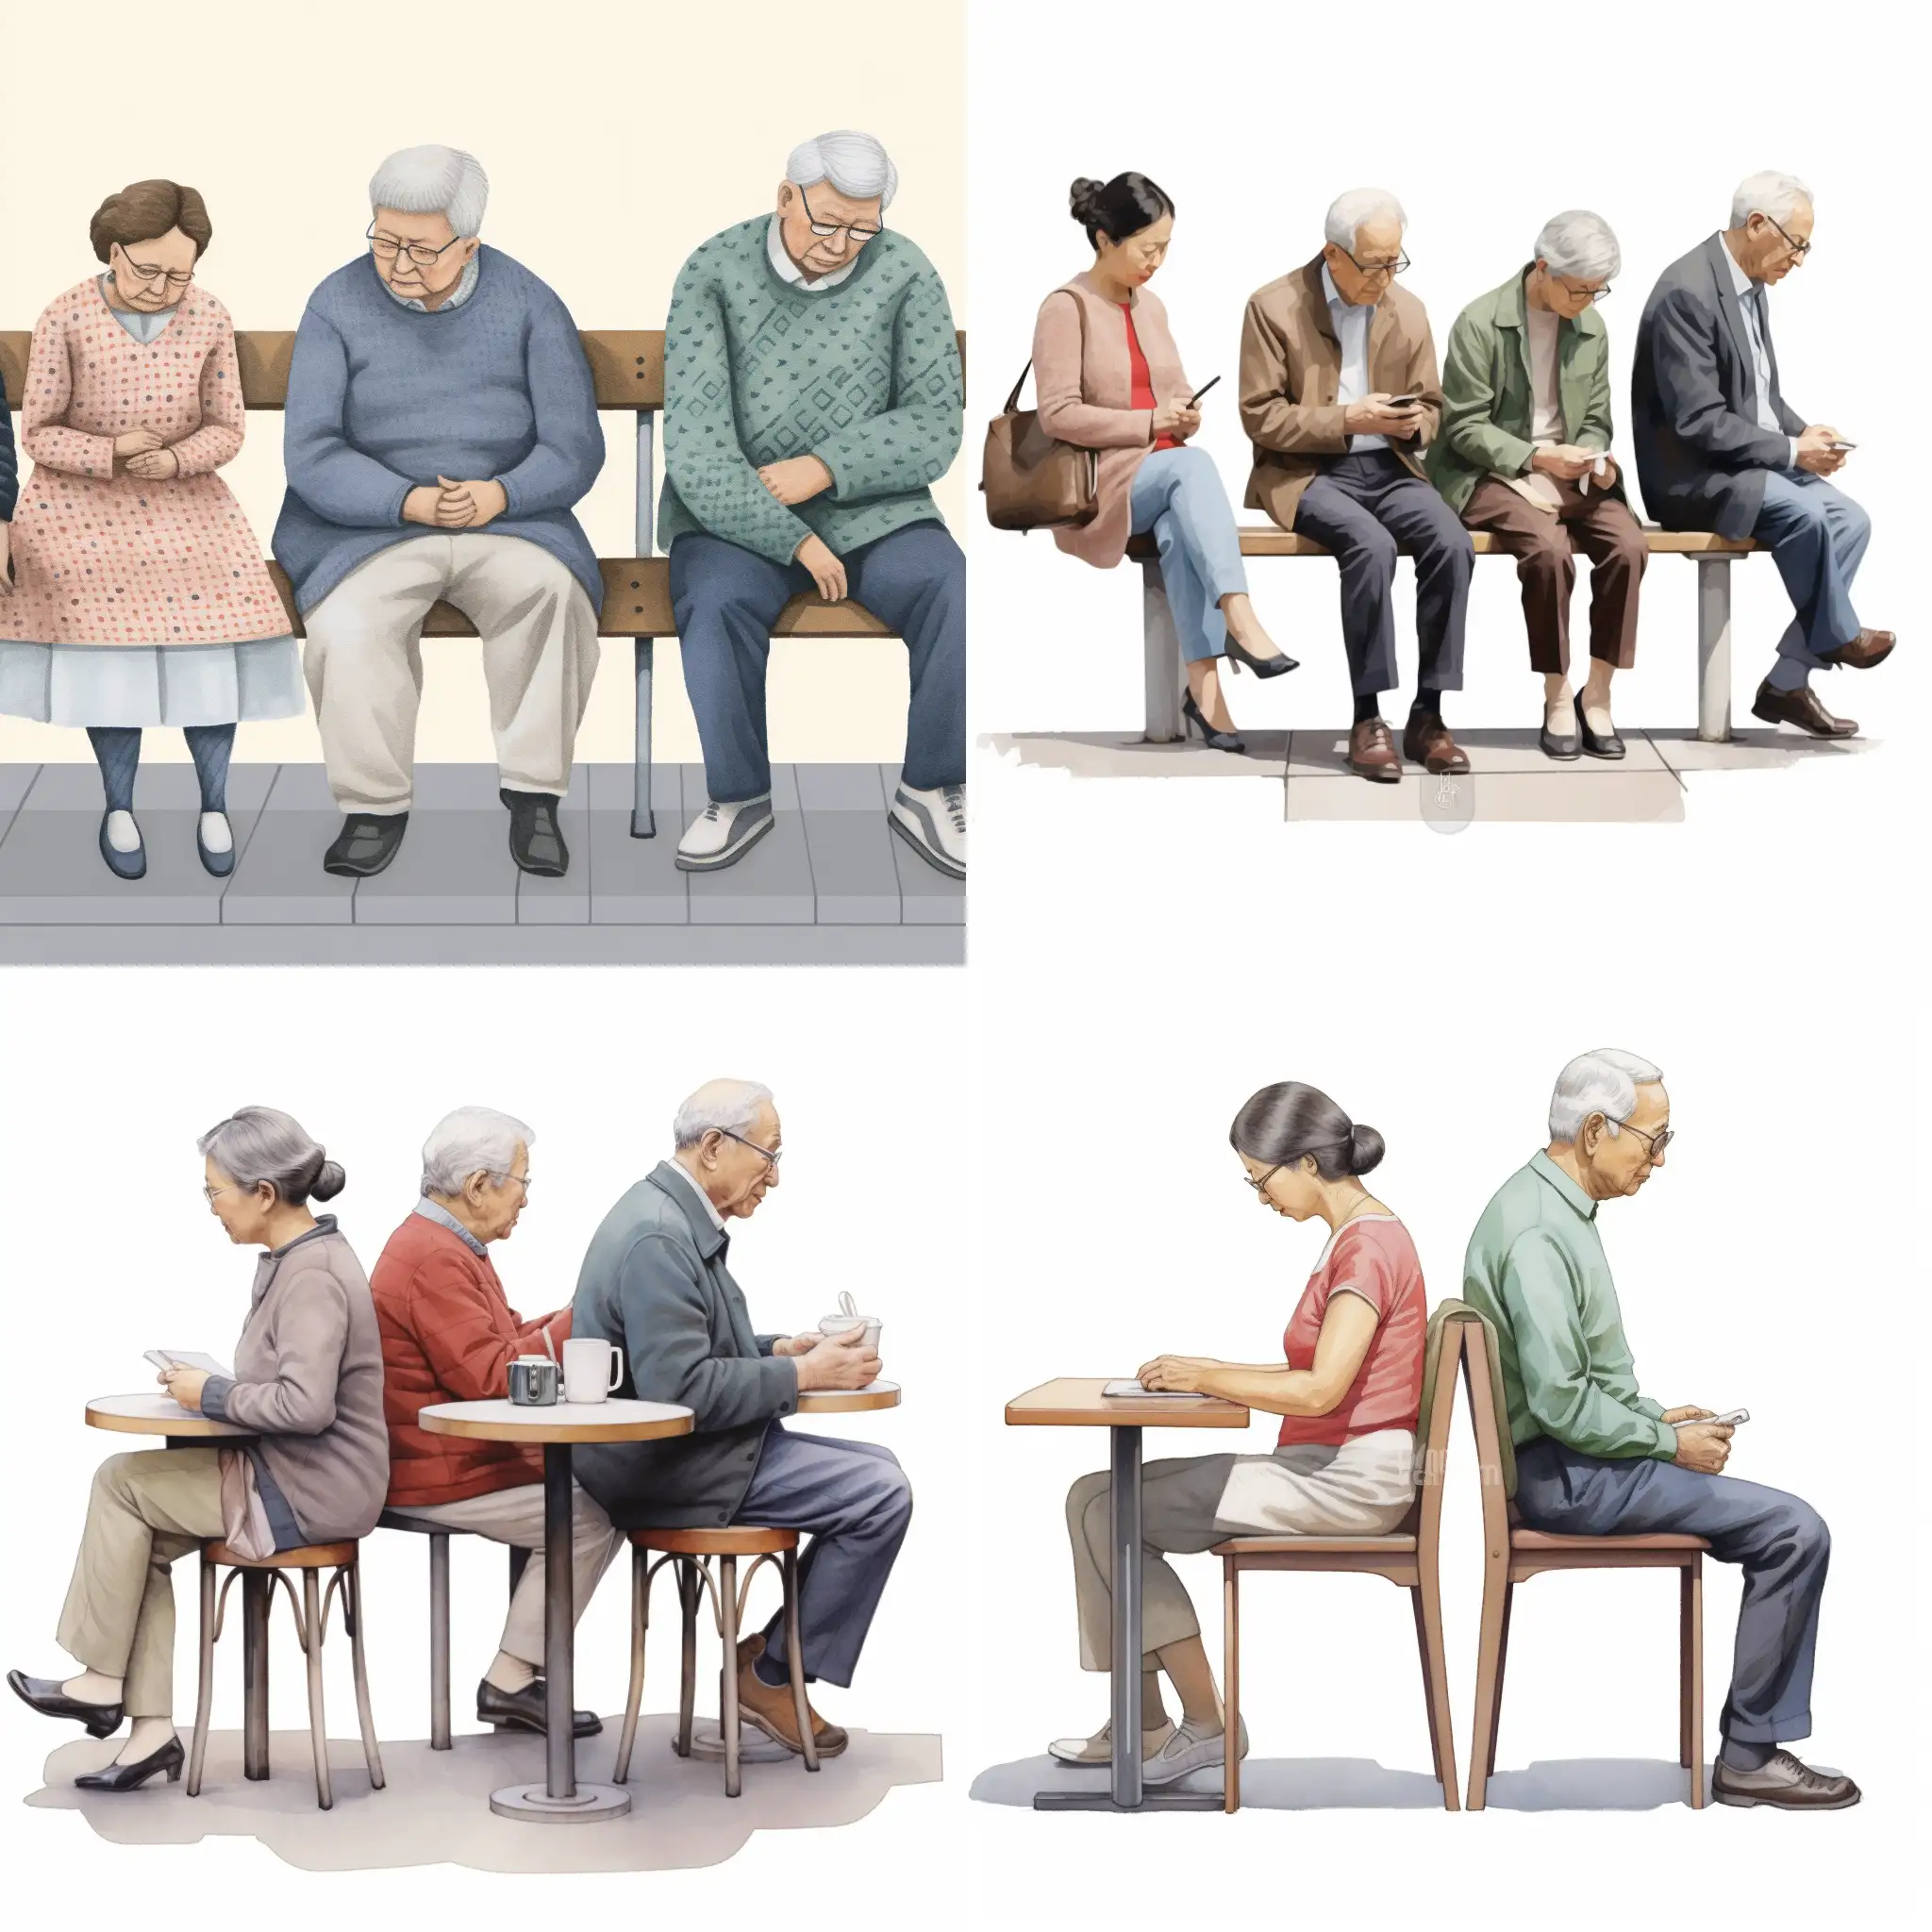 A depiction of common poor postures in people's daily lives, illustrating various unhealthy sitting and standing positions often observed in everyday settings, the focus is on the impact of these postures on the body, Illustration, digital art, emphasizing the ergonomics and physical strain